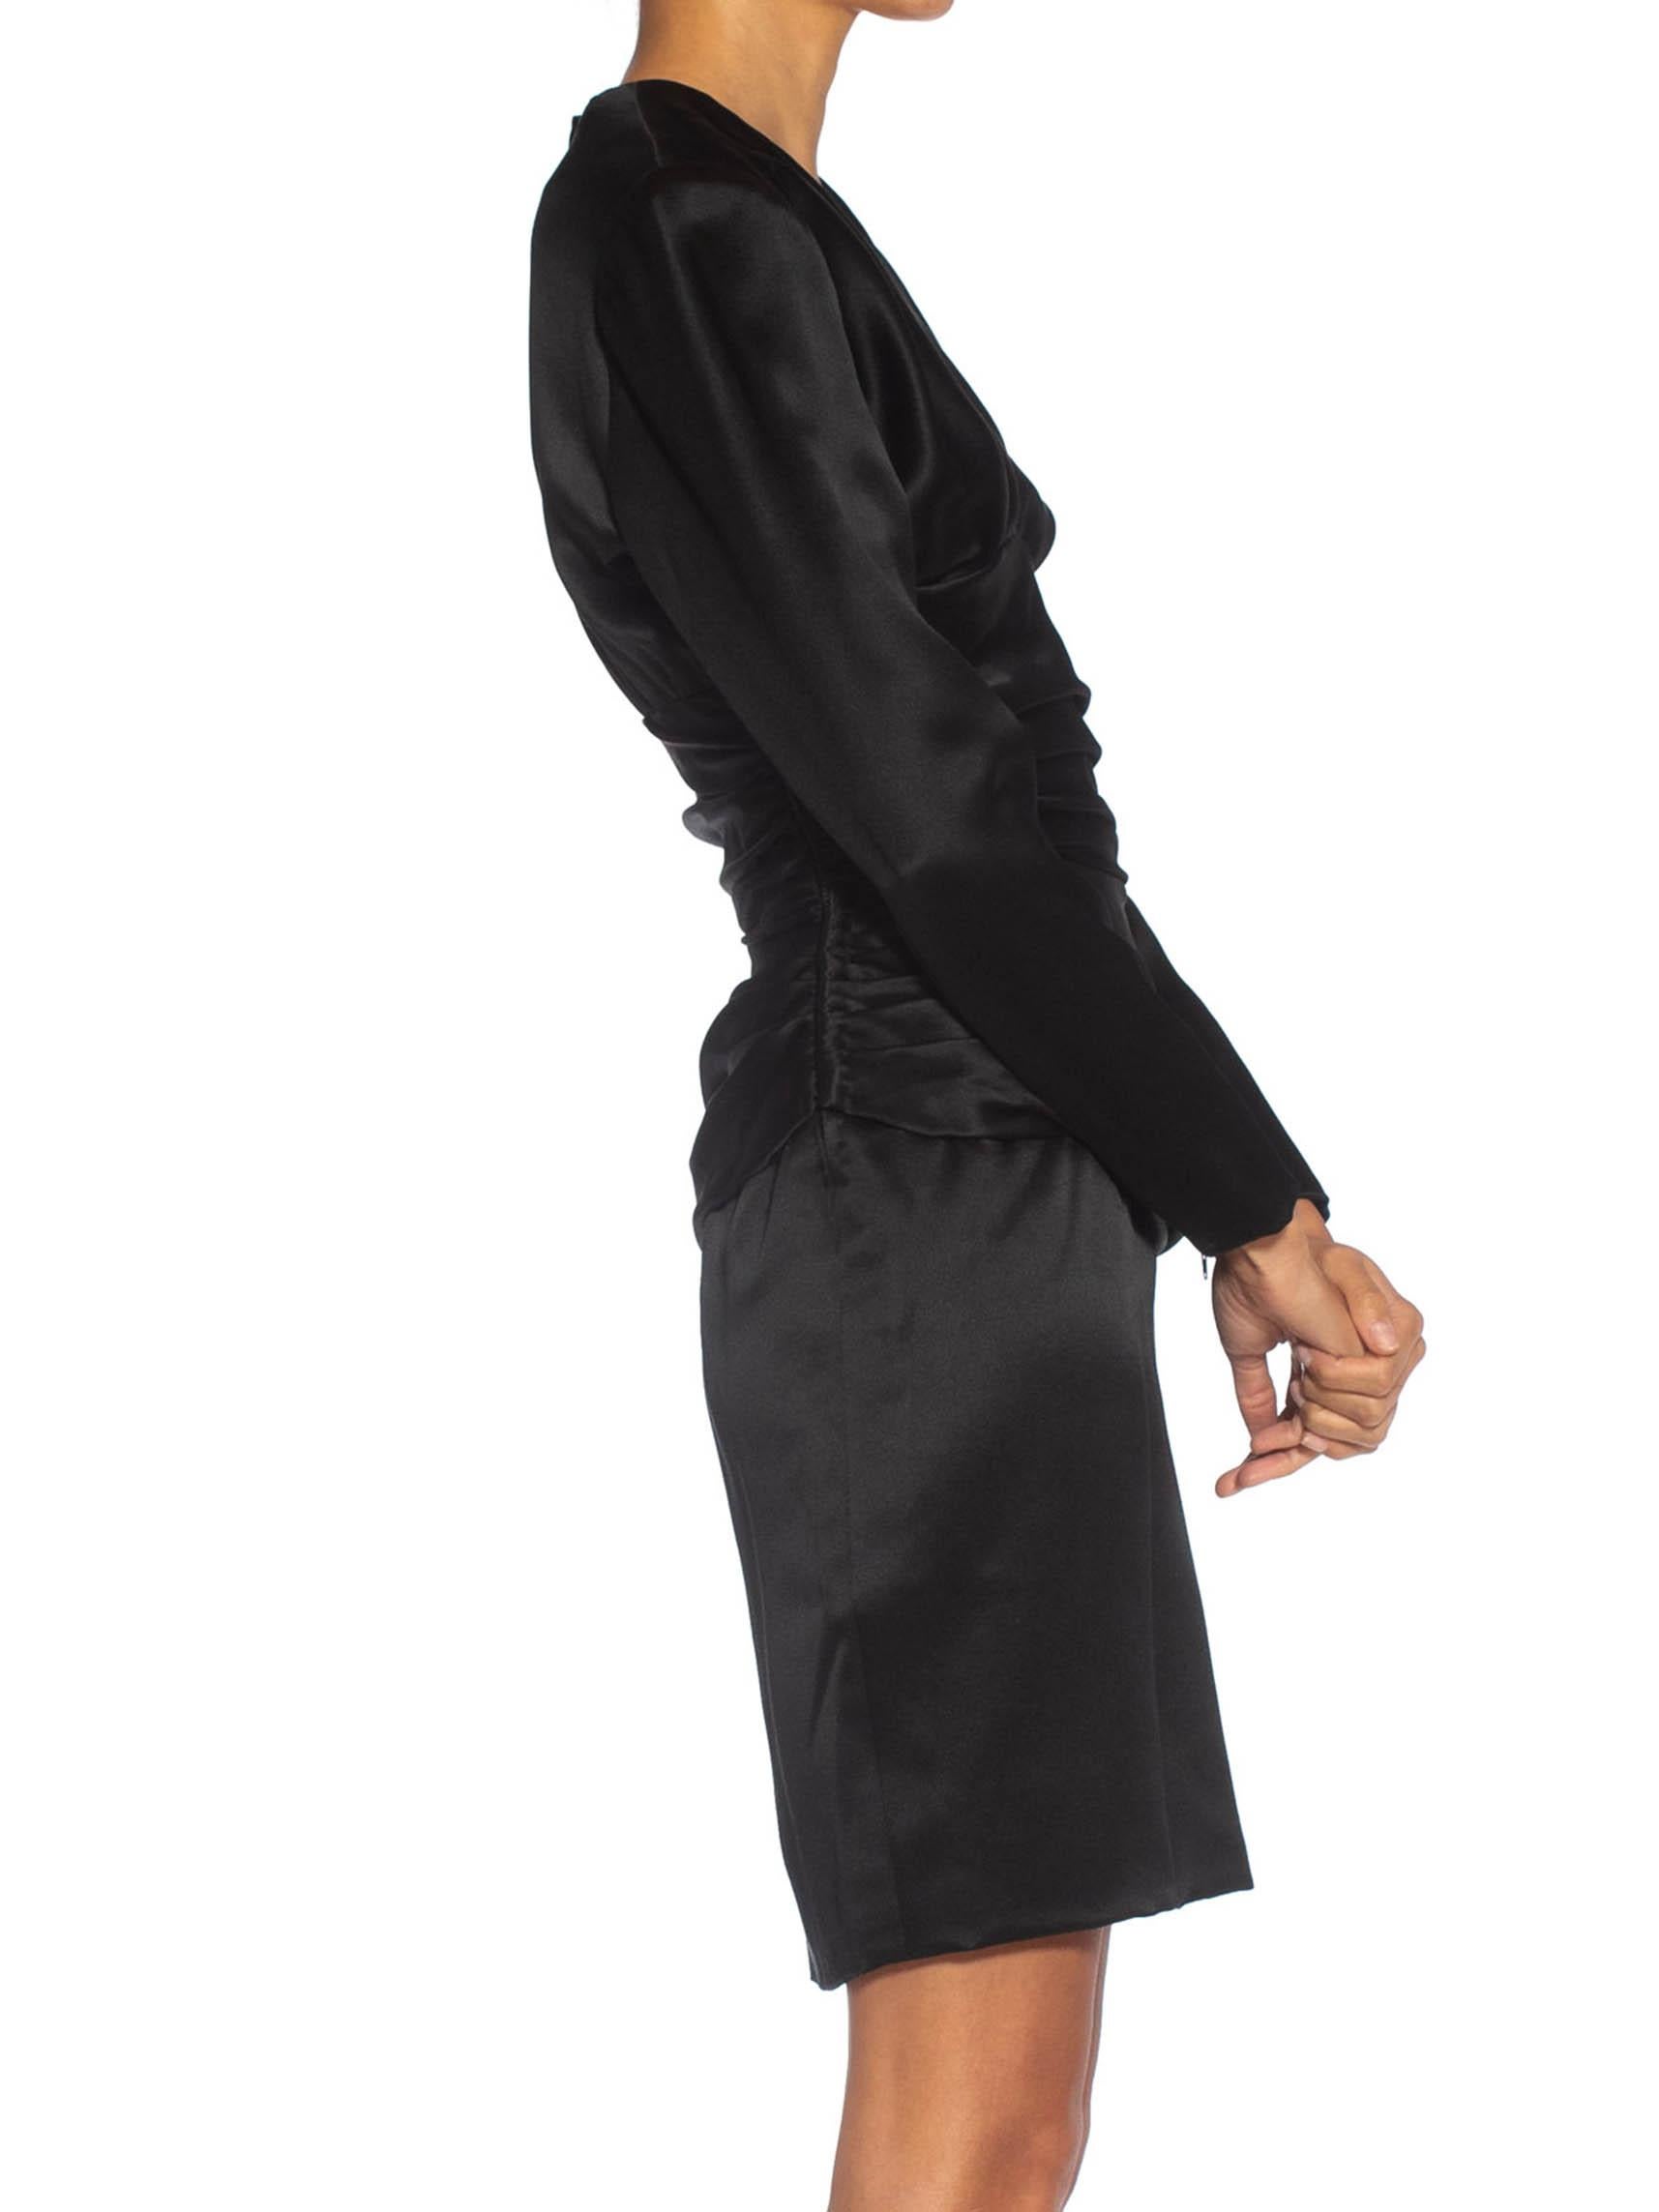 1980S GIVENCHY Black Haute Couture Silk Double Faced Satin Cocktail Dress With  In Excellent Condition For Sale In New York, NY